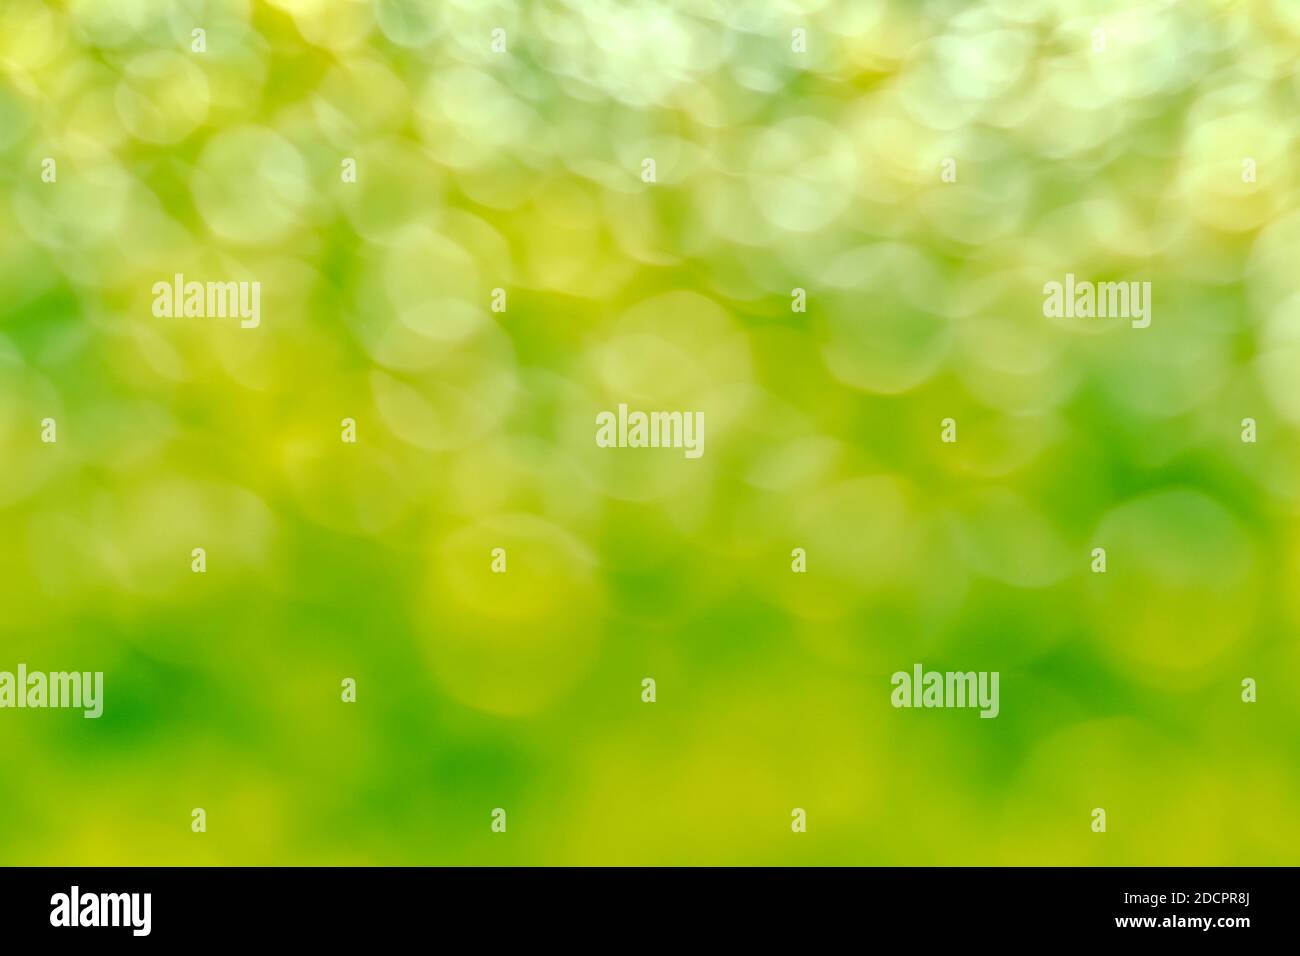 Herbal sunny abstract airy blurred background. Lots of translucent bokeh circles. Stock Photo